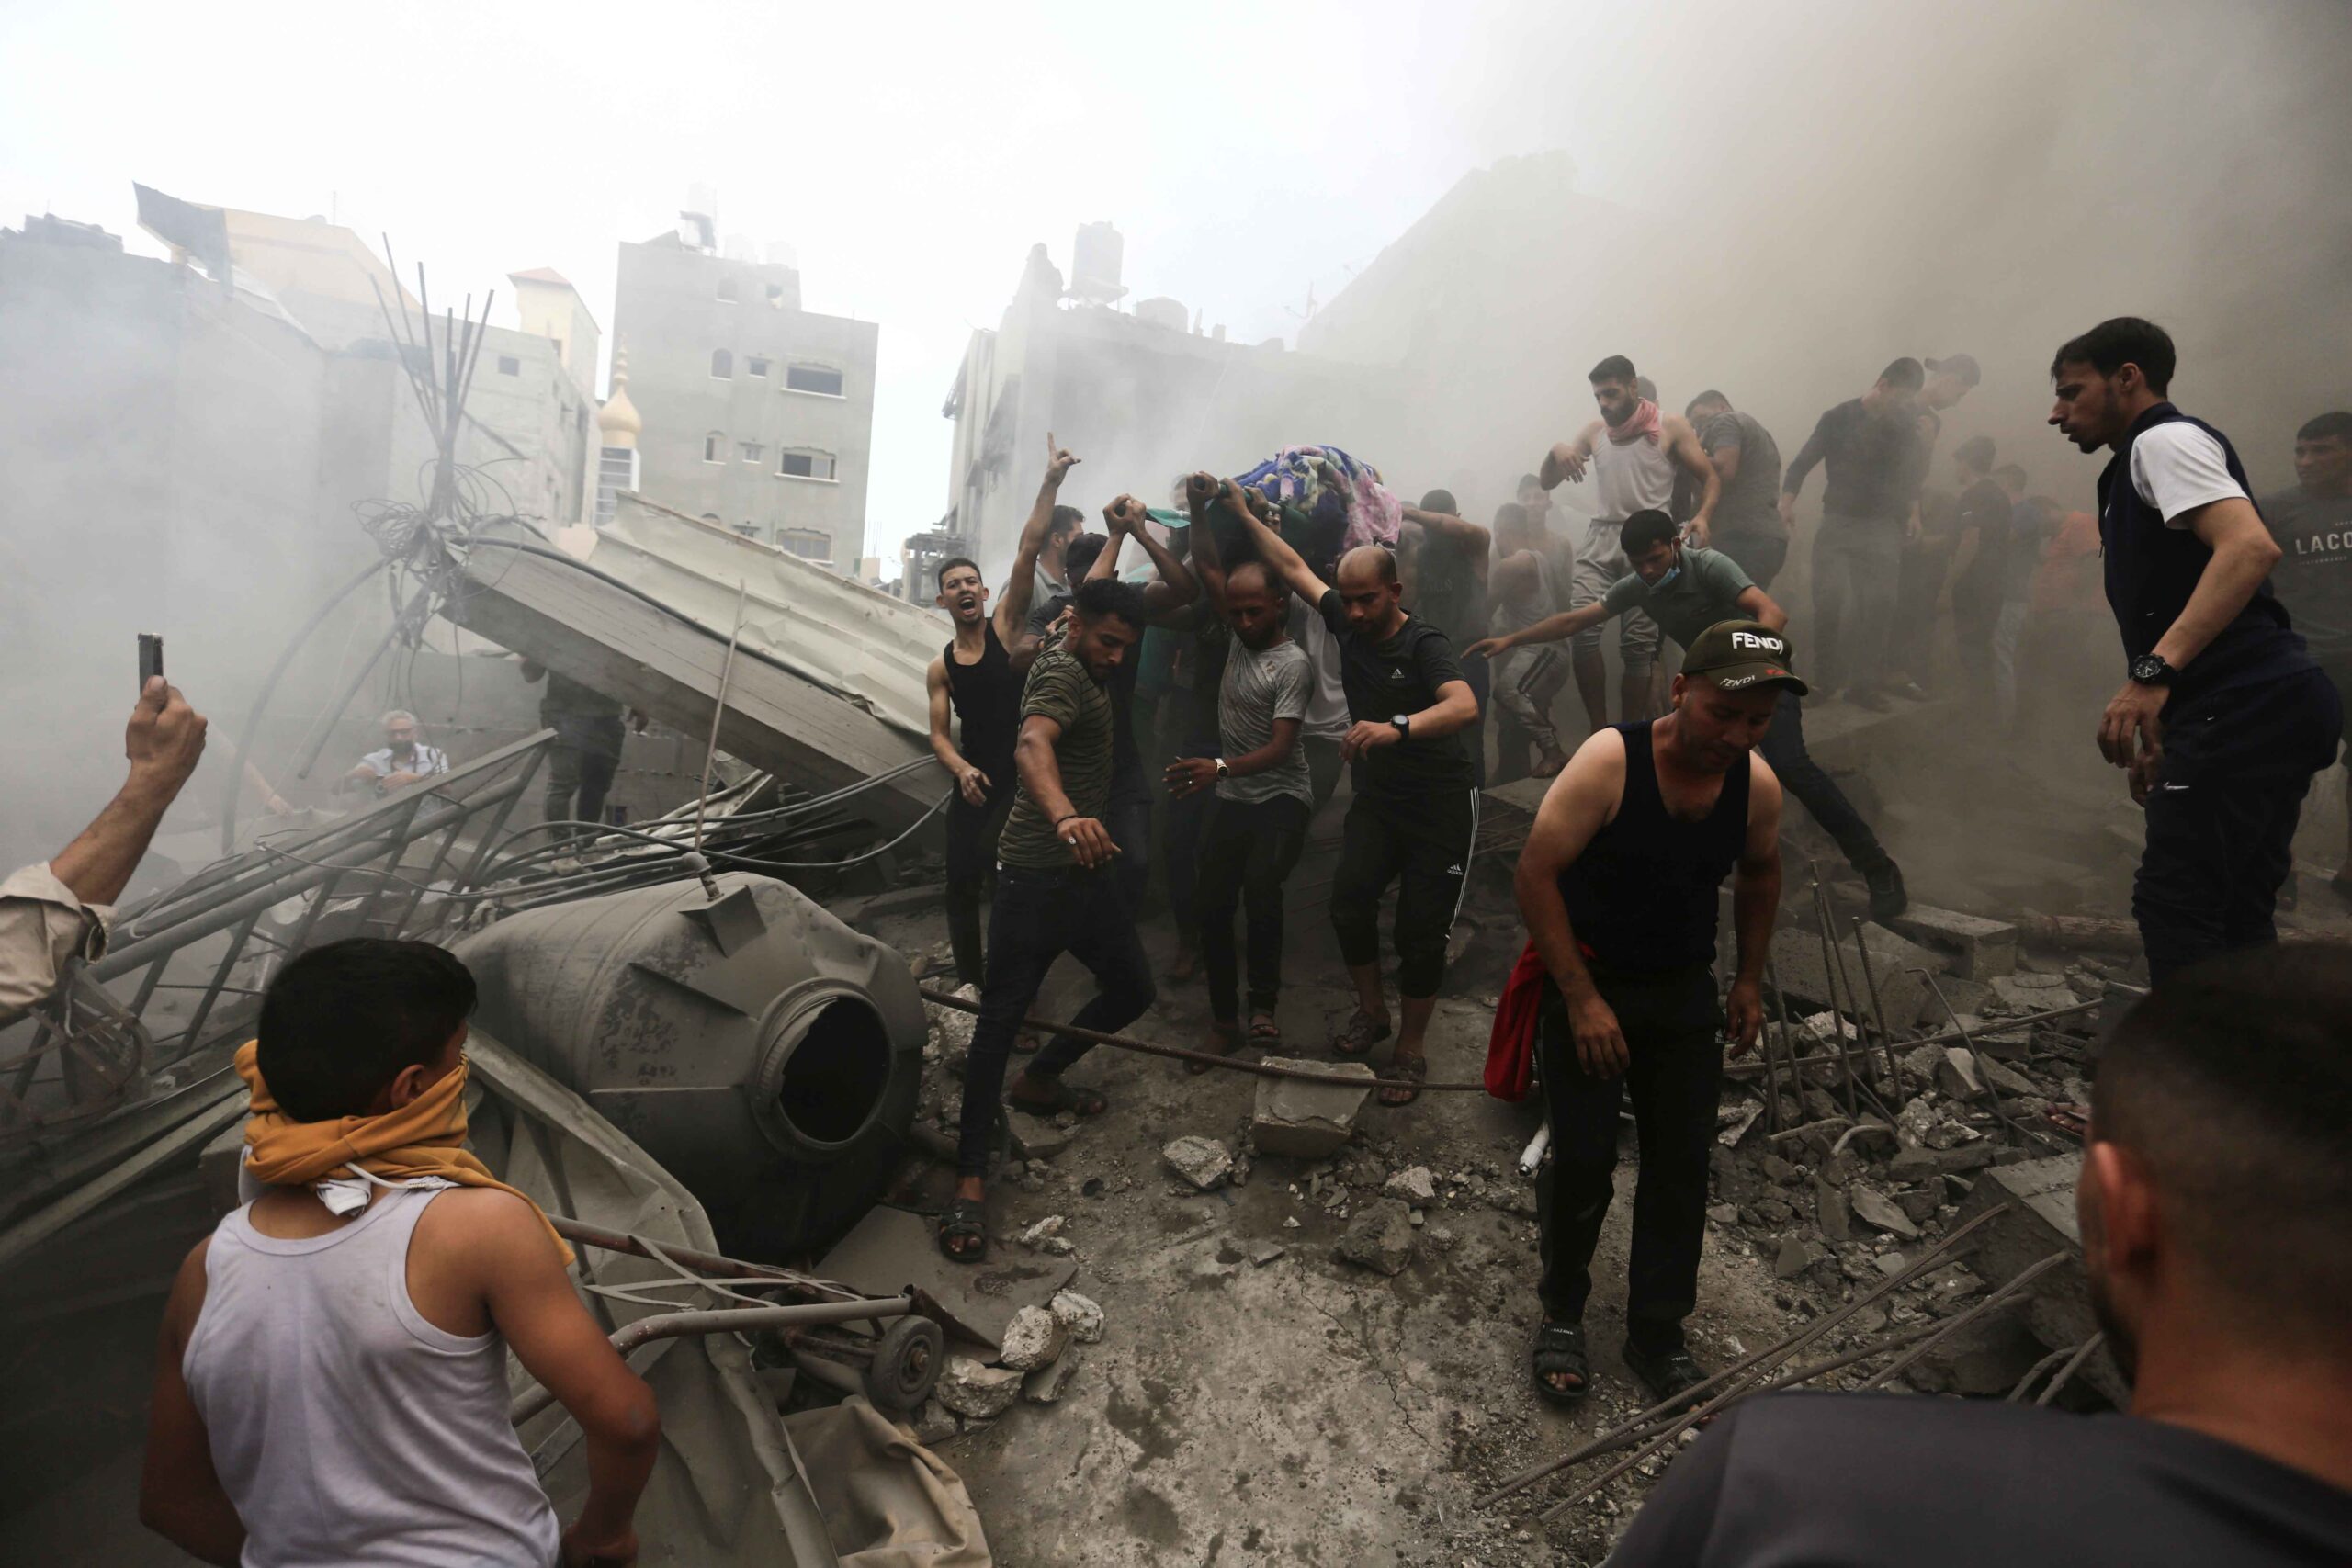 Israel has ordered a “complete siege” of the Gaza Strip, cutting off food, water, and electricity to the Hamas-controlled region in response to the invasion. (AP Photo/Ramez Mahmoud, File)